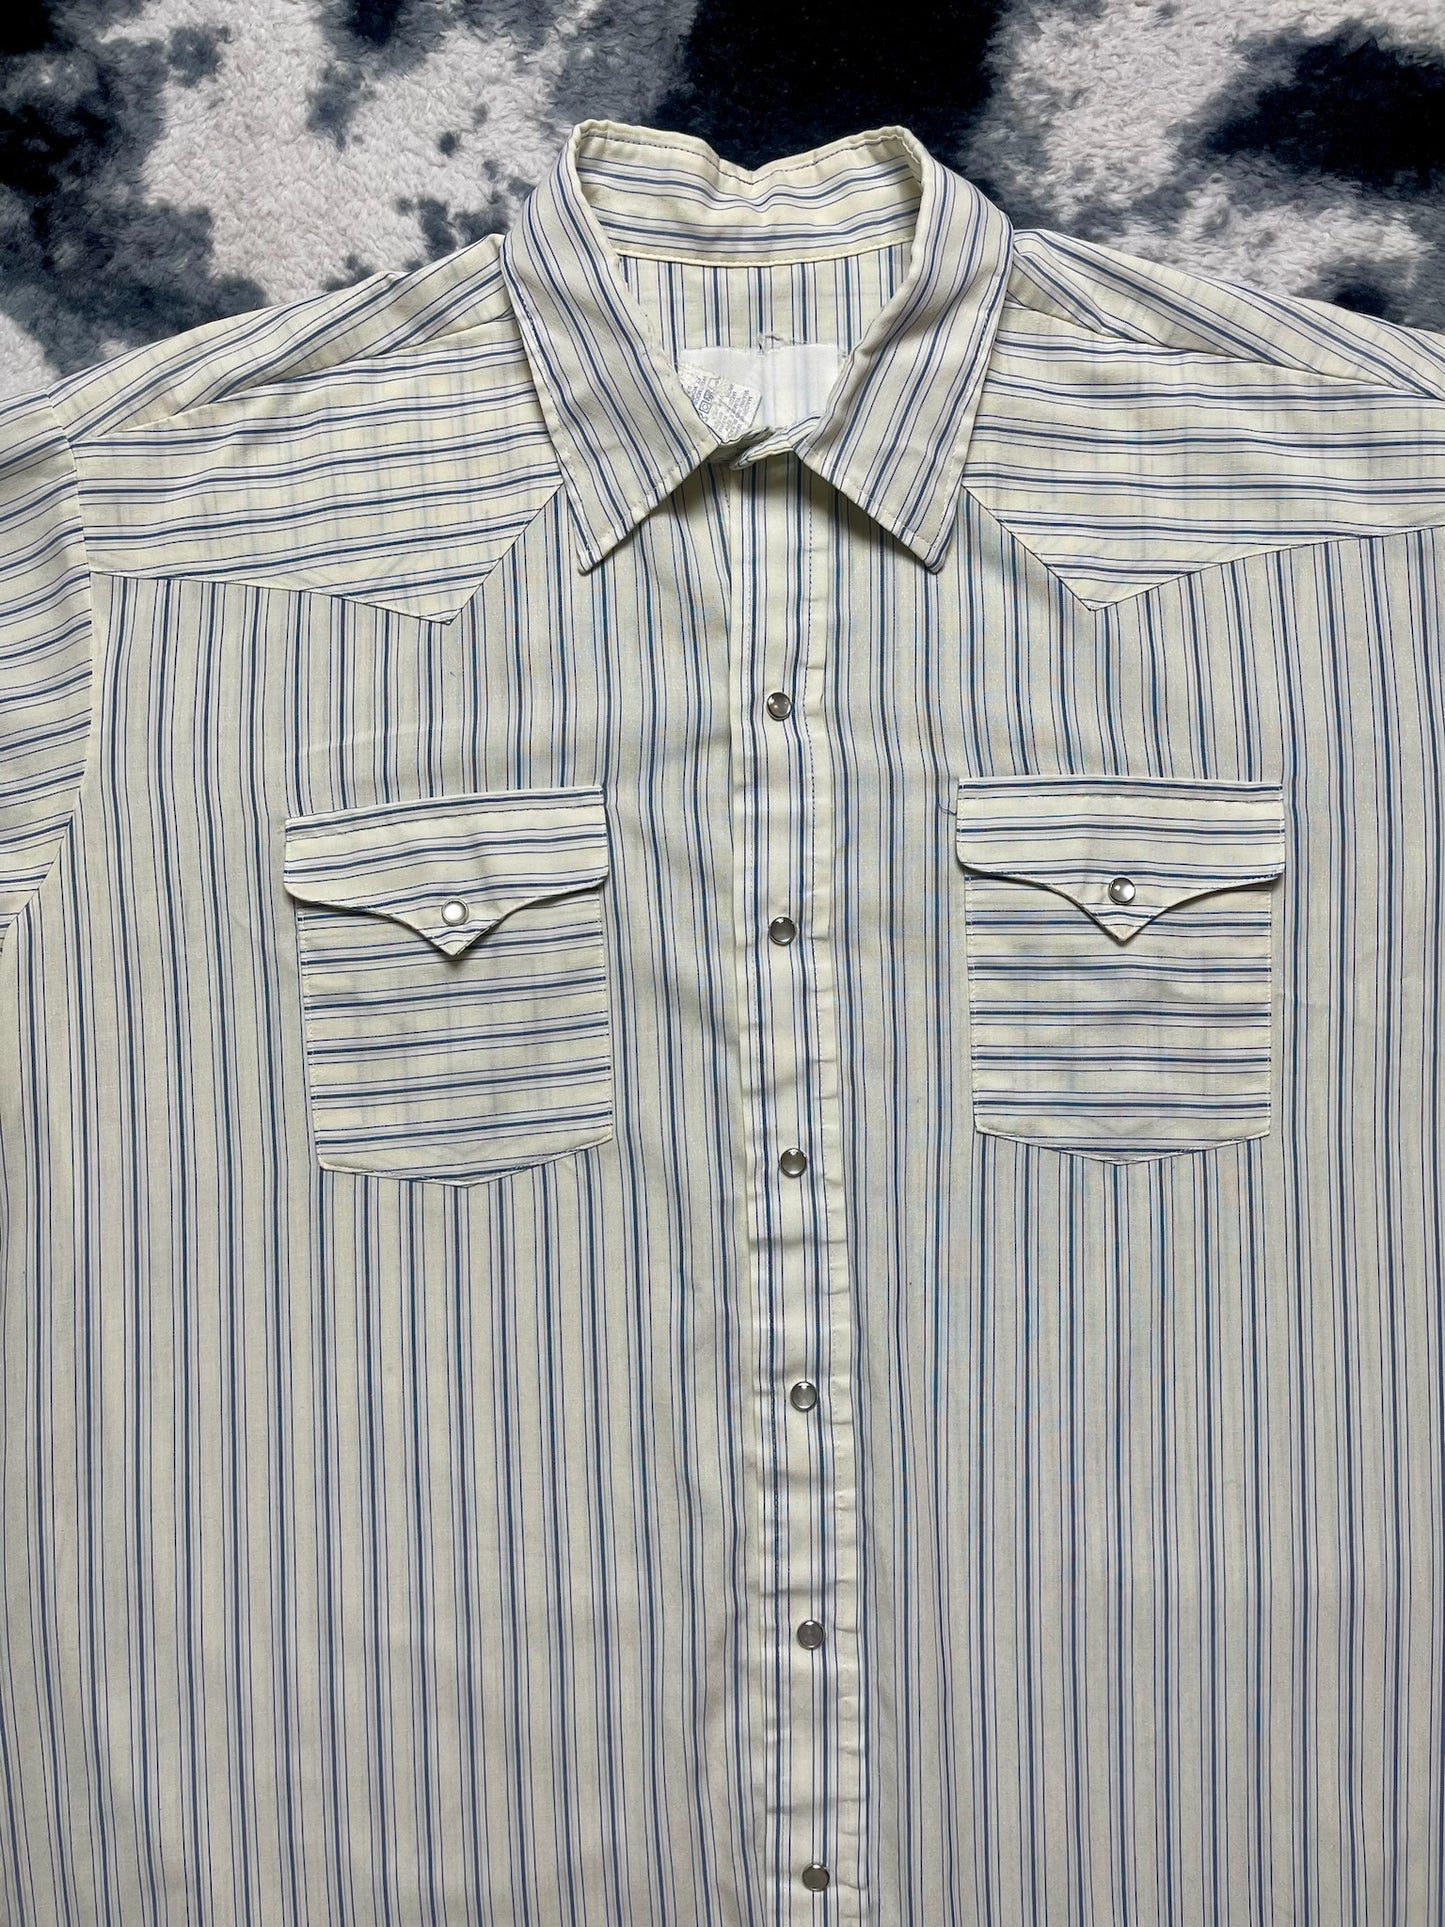 White & Blue Striped Short Sleeve Pearl Snap (XL)